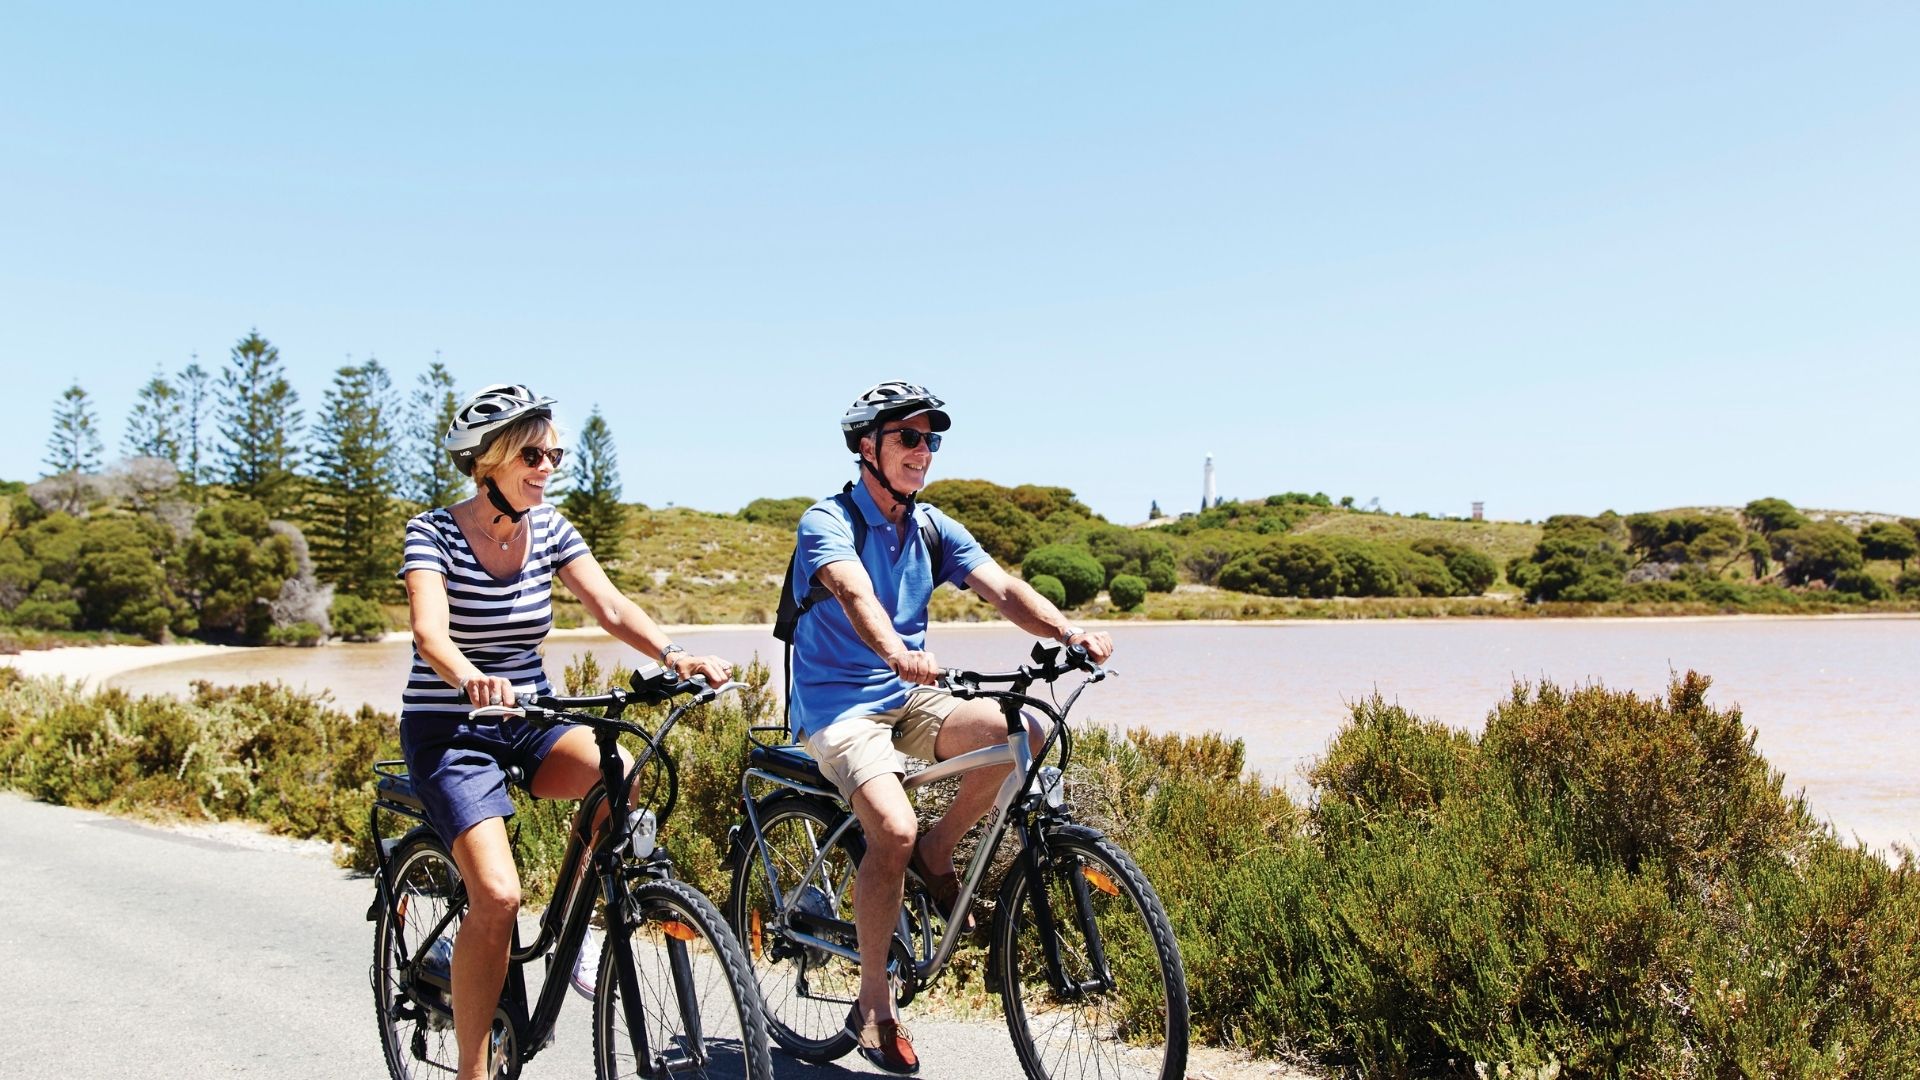 Discoveryparks rottnest island cycling